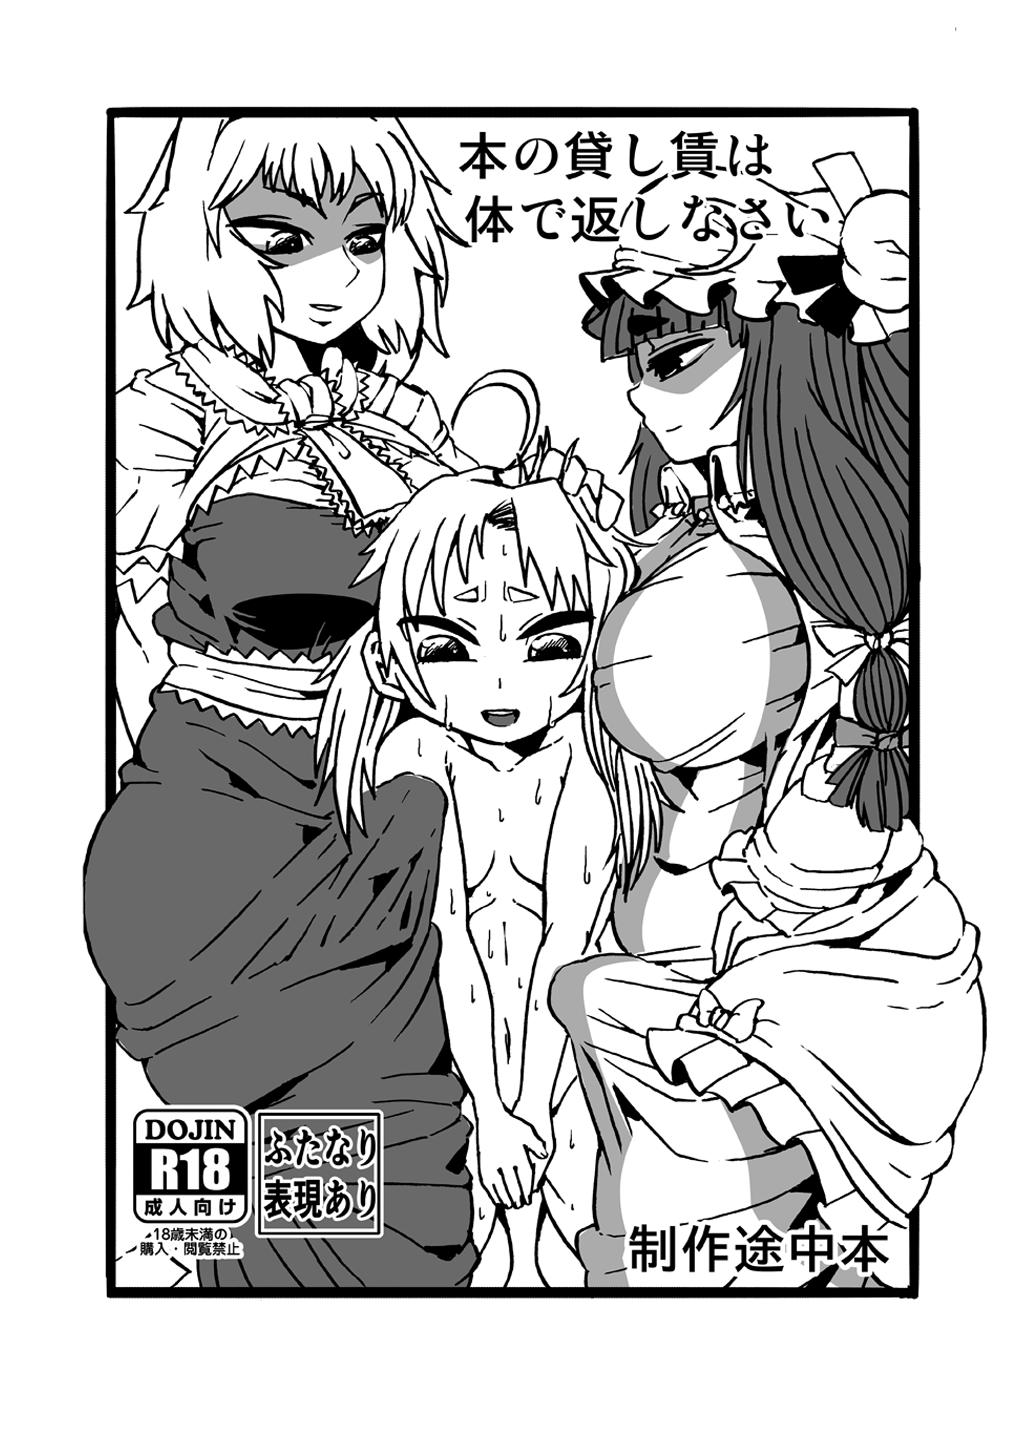 Old Vs Young C94お疲れさまでした - Touhou project Fuck For Money - Picture 1